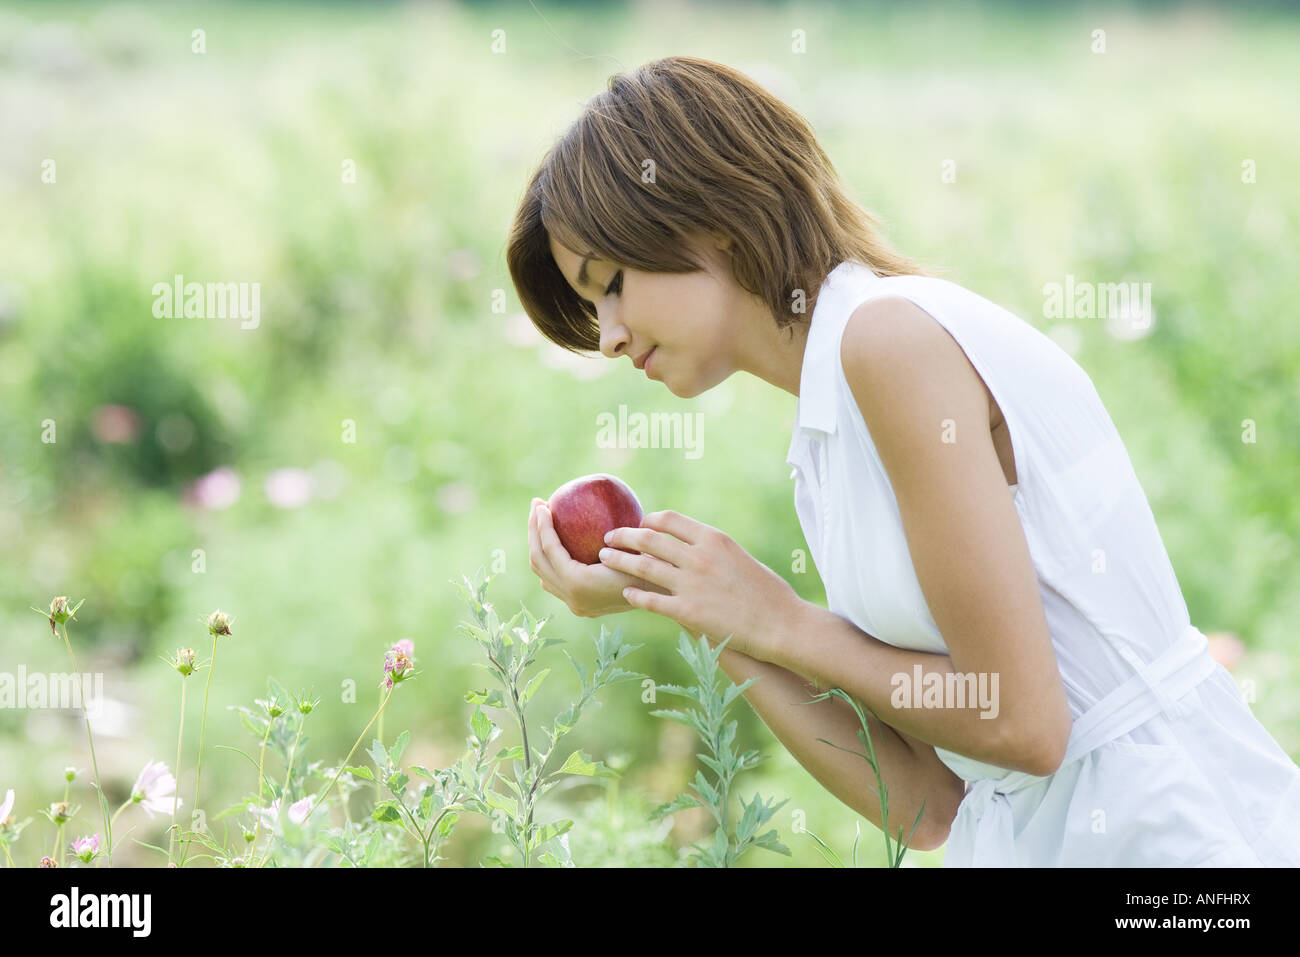 Young woman standing in garden, holding apple Stock Photo